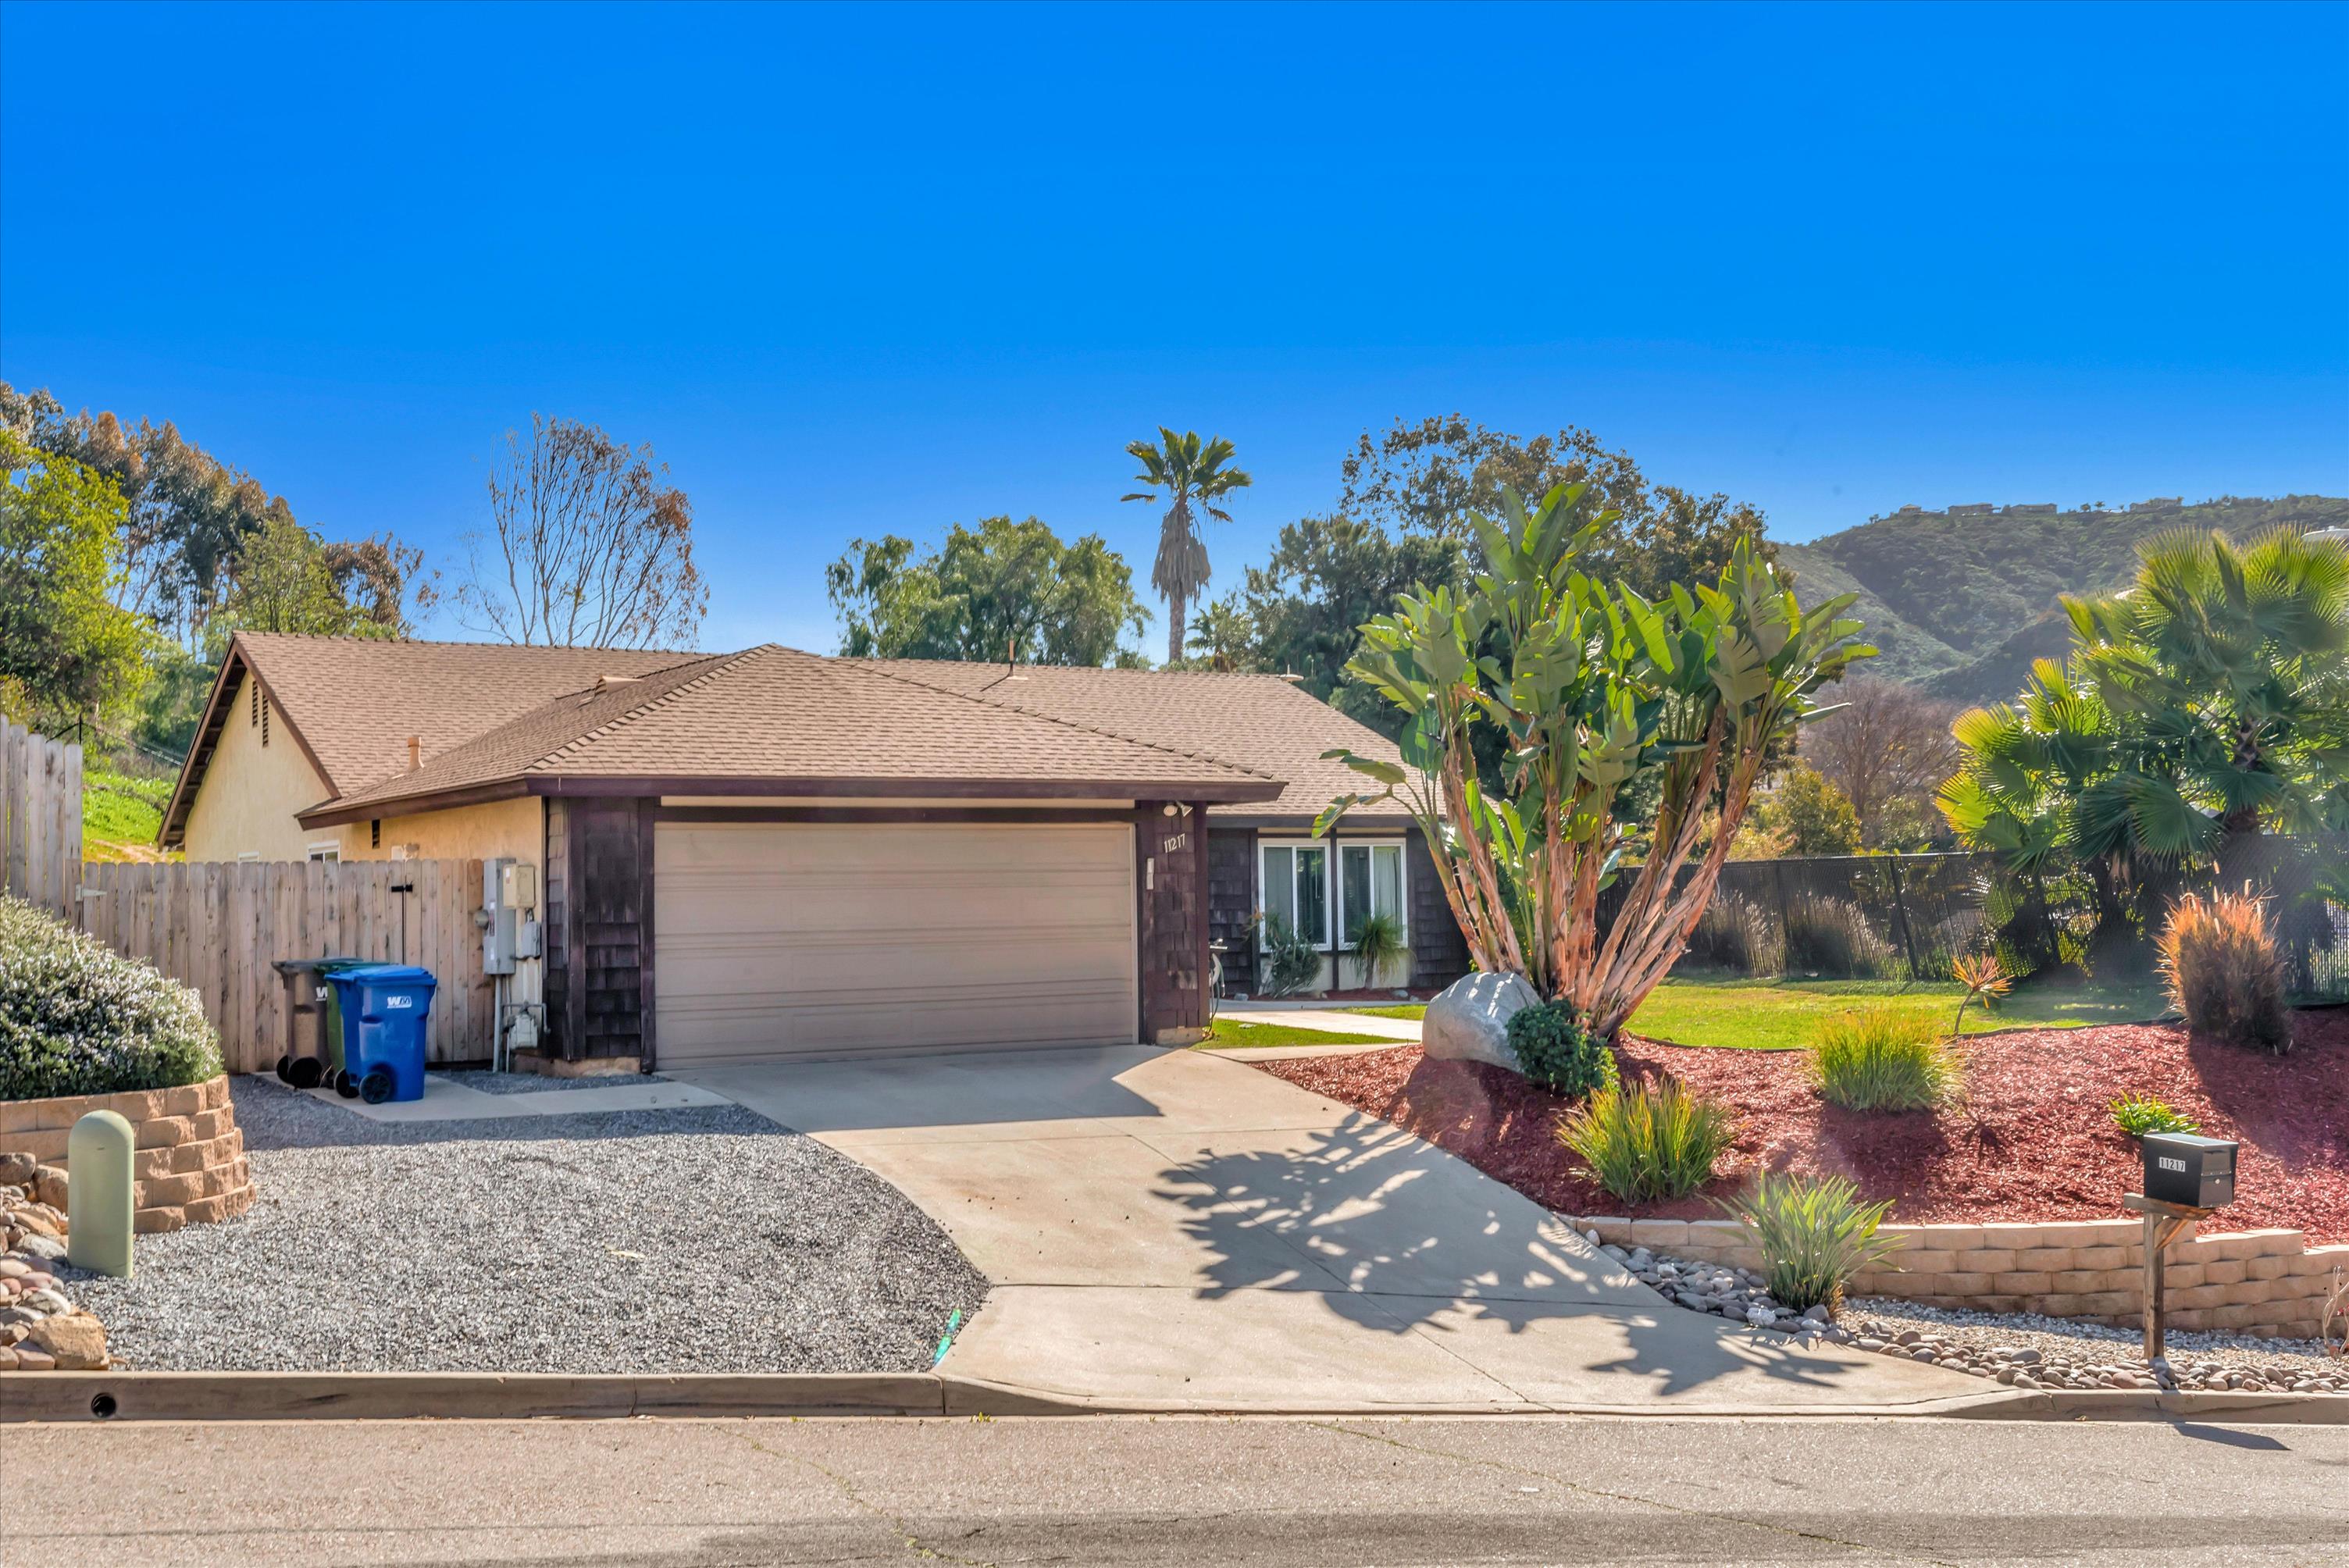 Beautiful Santee, CA house showcasing the best property management services